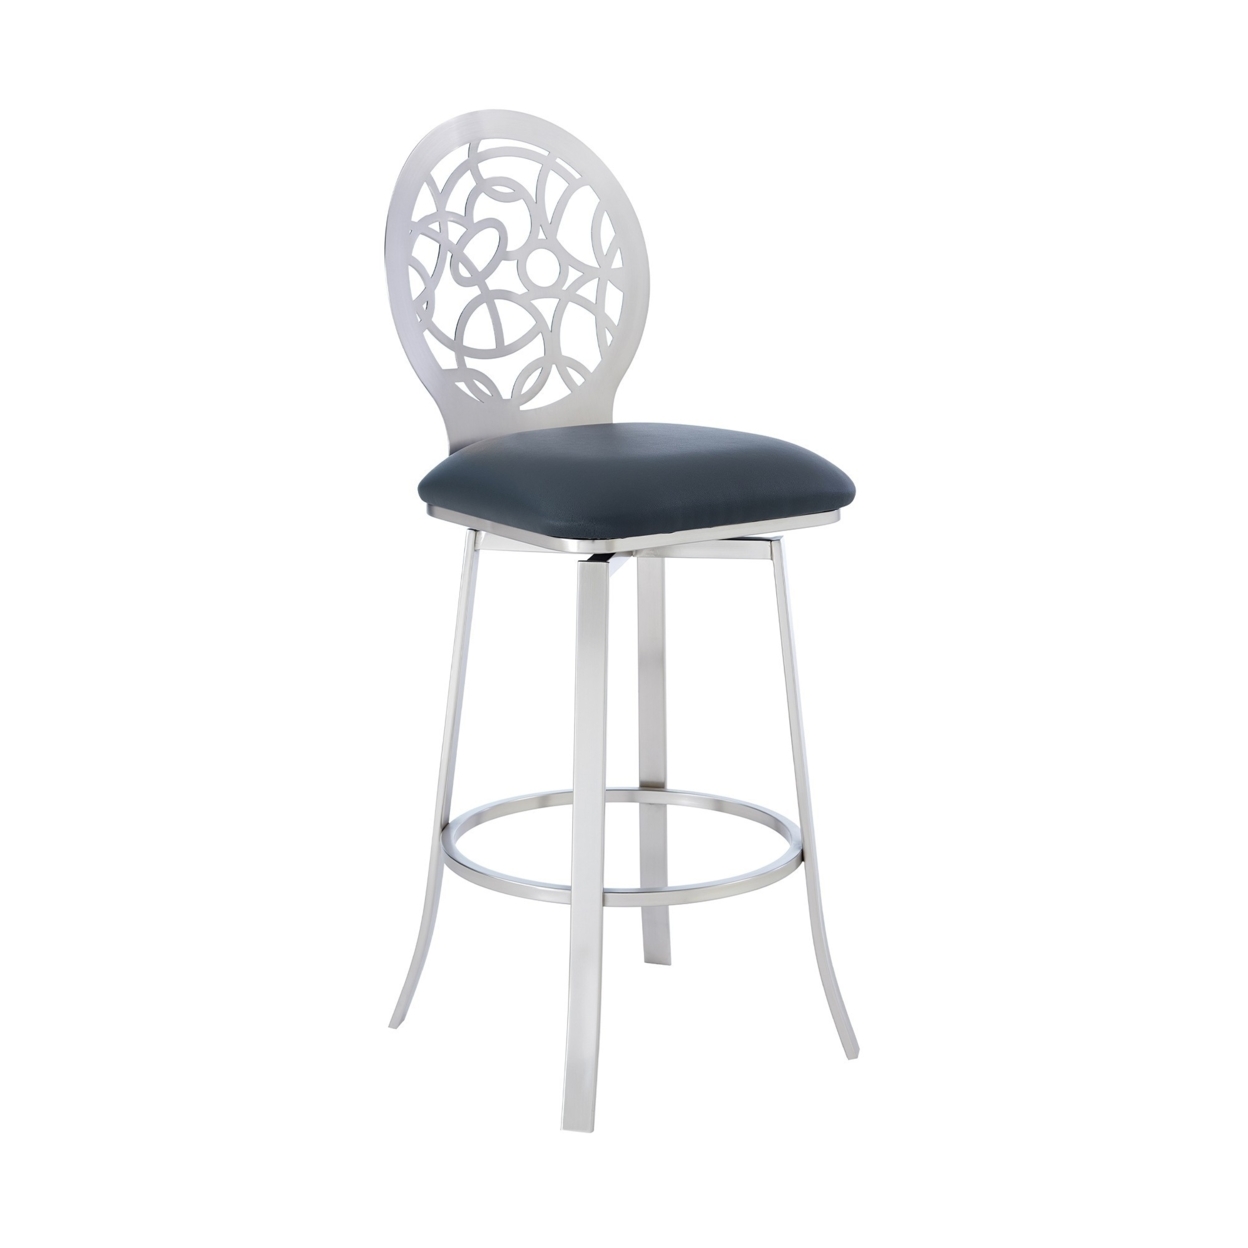 30 Inches Leatherette Barstool With Geometric Backrest, Silver- Saltoro Sherpi